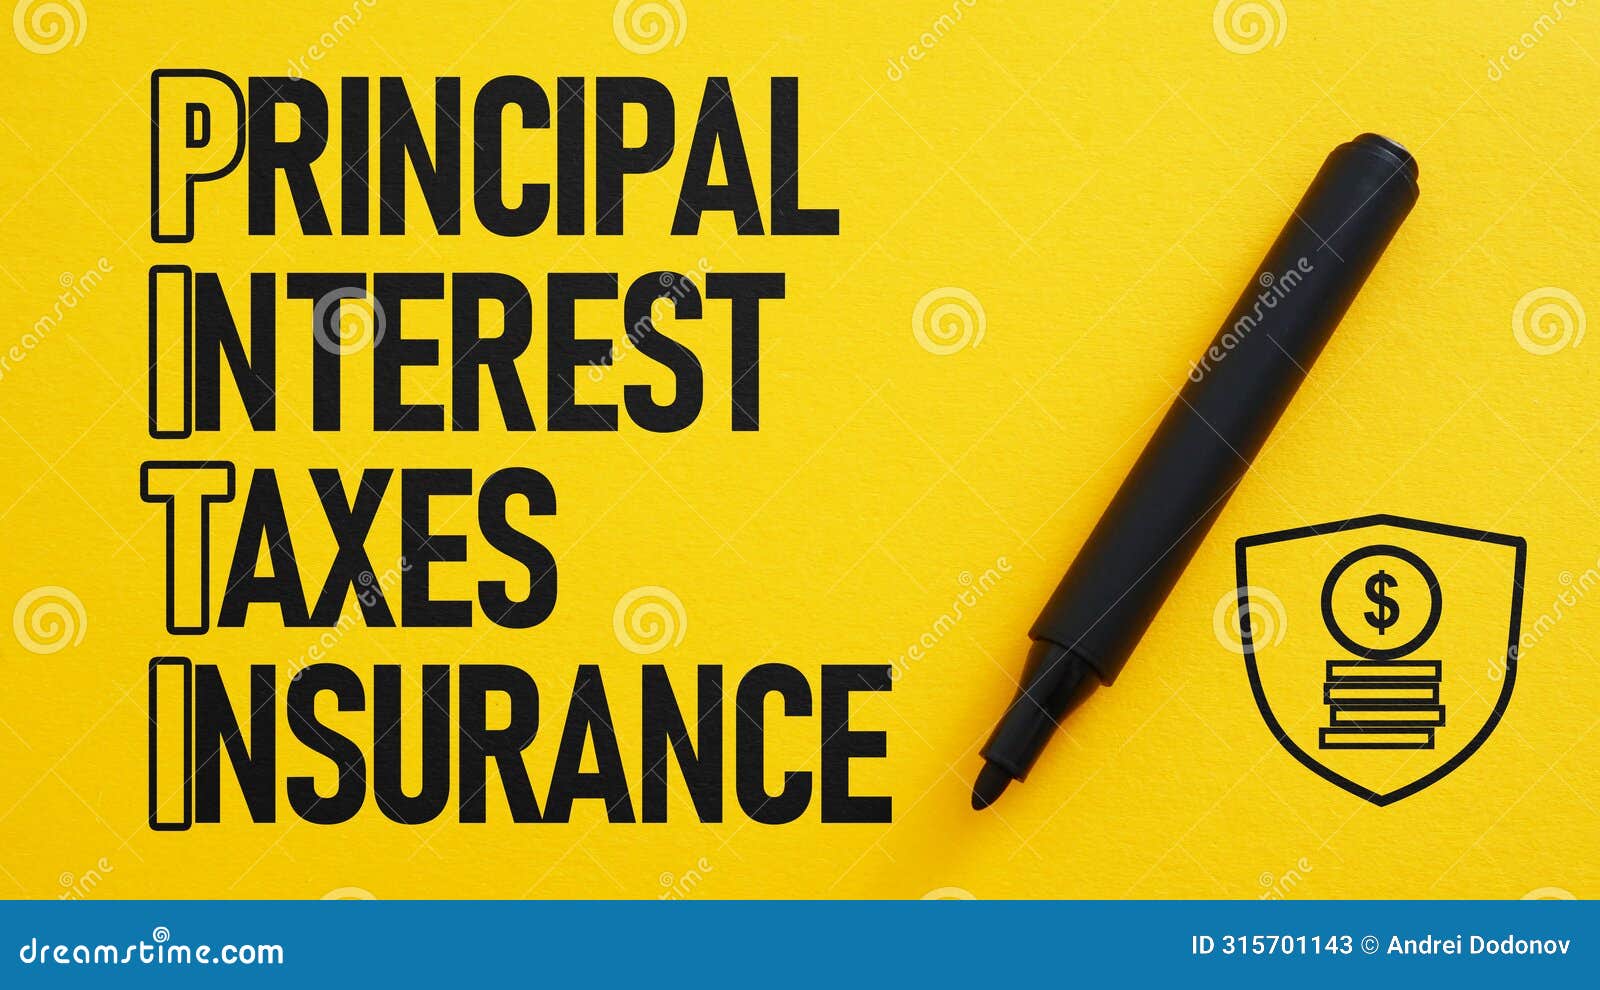 principal, interest, taxes, insurance piti is shown using the text